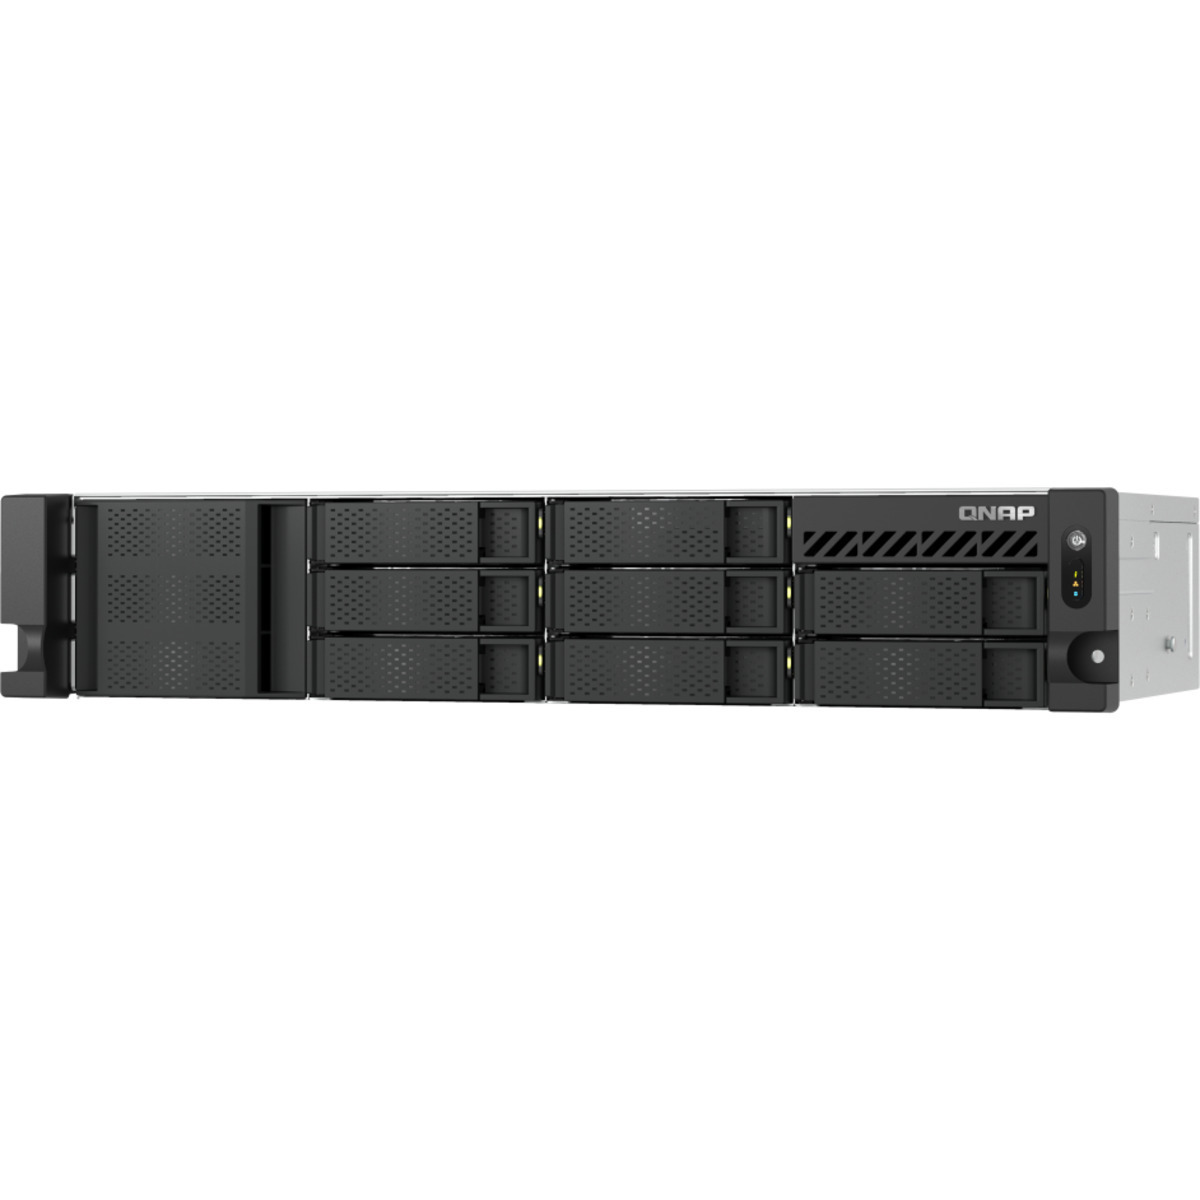 QNAP TS-855eU 48tb 8-Bay RackMount Multimedia / Power User / Business NAS - Network Attached Storage Device 4x12tb Seagate IronWolf ST12000VN0008 3.5 7200rpm SATA 6Gb/s HDD NAS Class Drives Installed - Burn-In Tested - FREE RAM UPGRADE TS-855eU